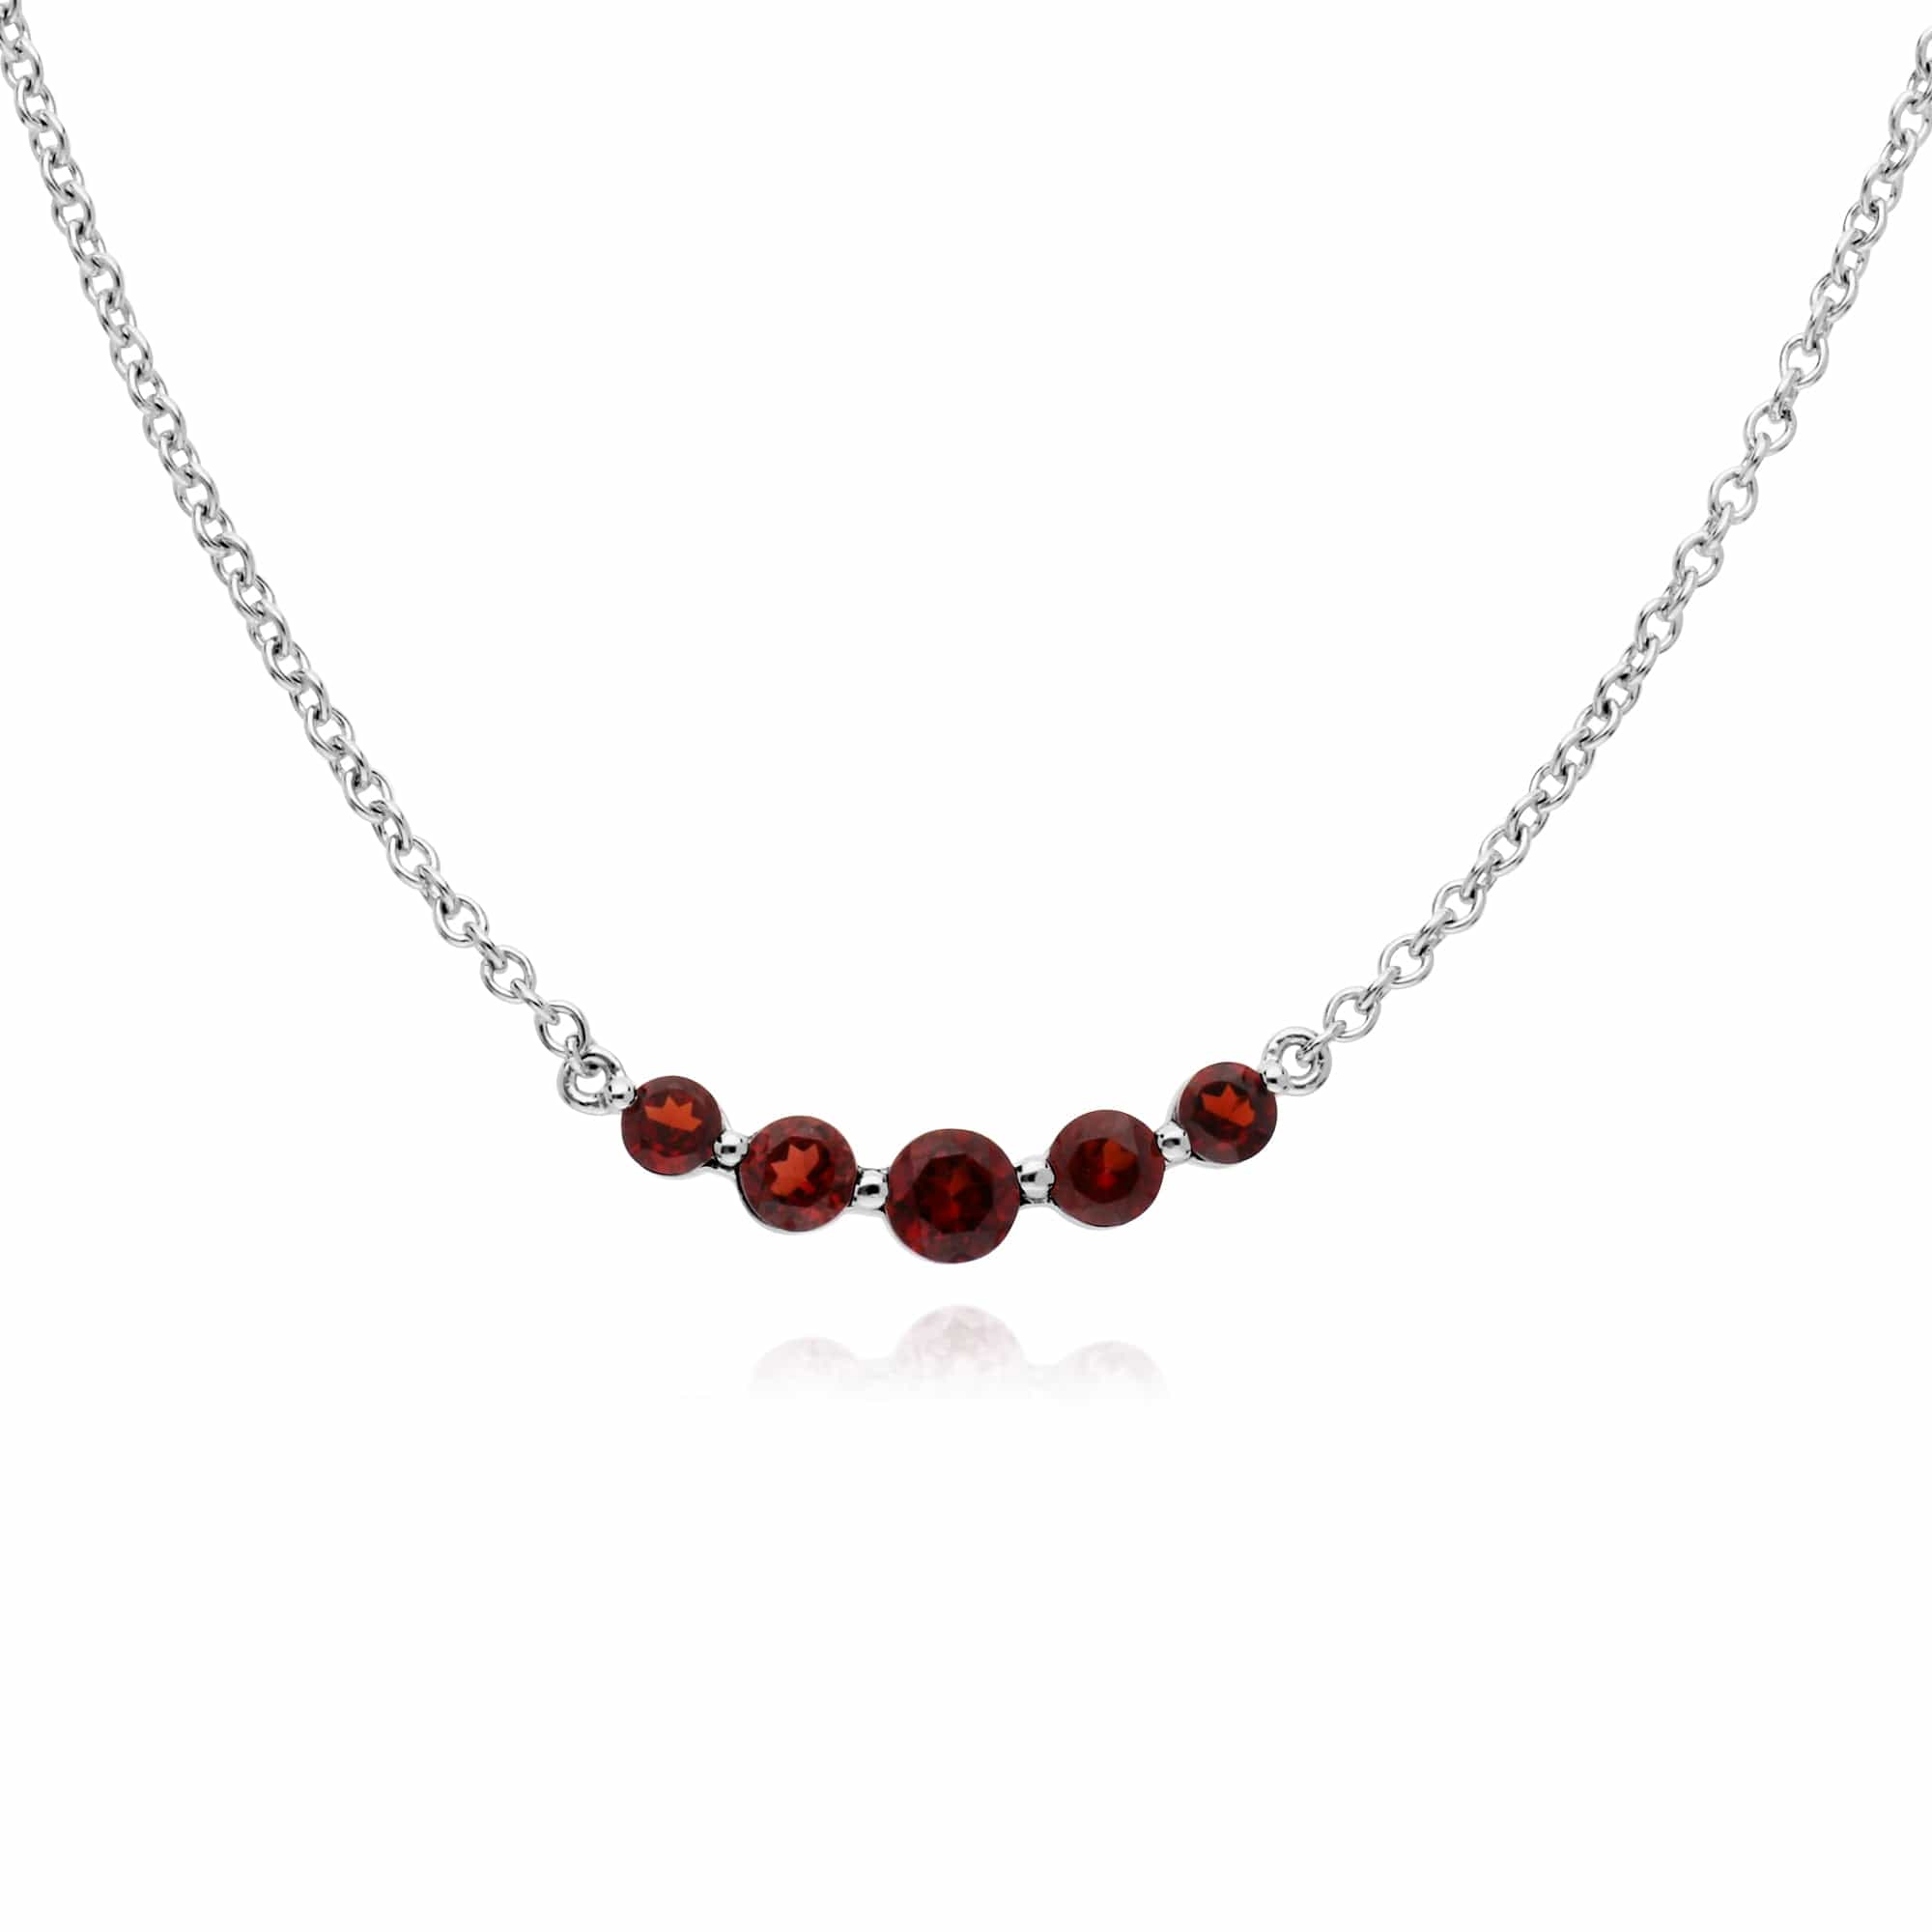 270N034102925-270R055902925 Classic Round Garnet Five Stone Gradient Ring & Necklace Set in 925 Sterling Silver 2